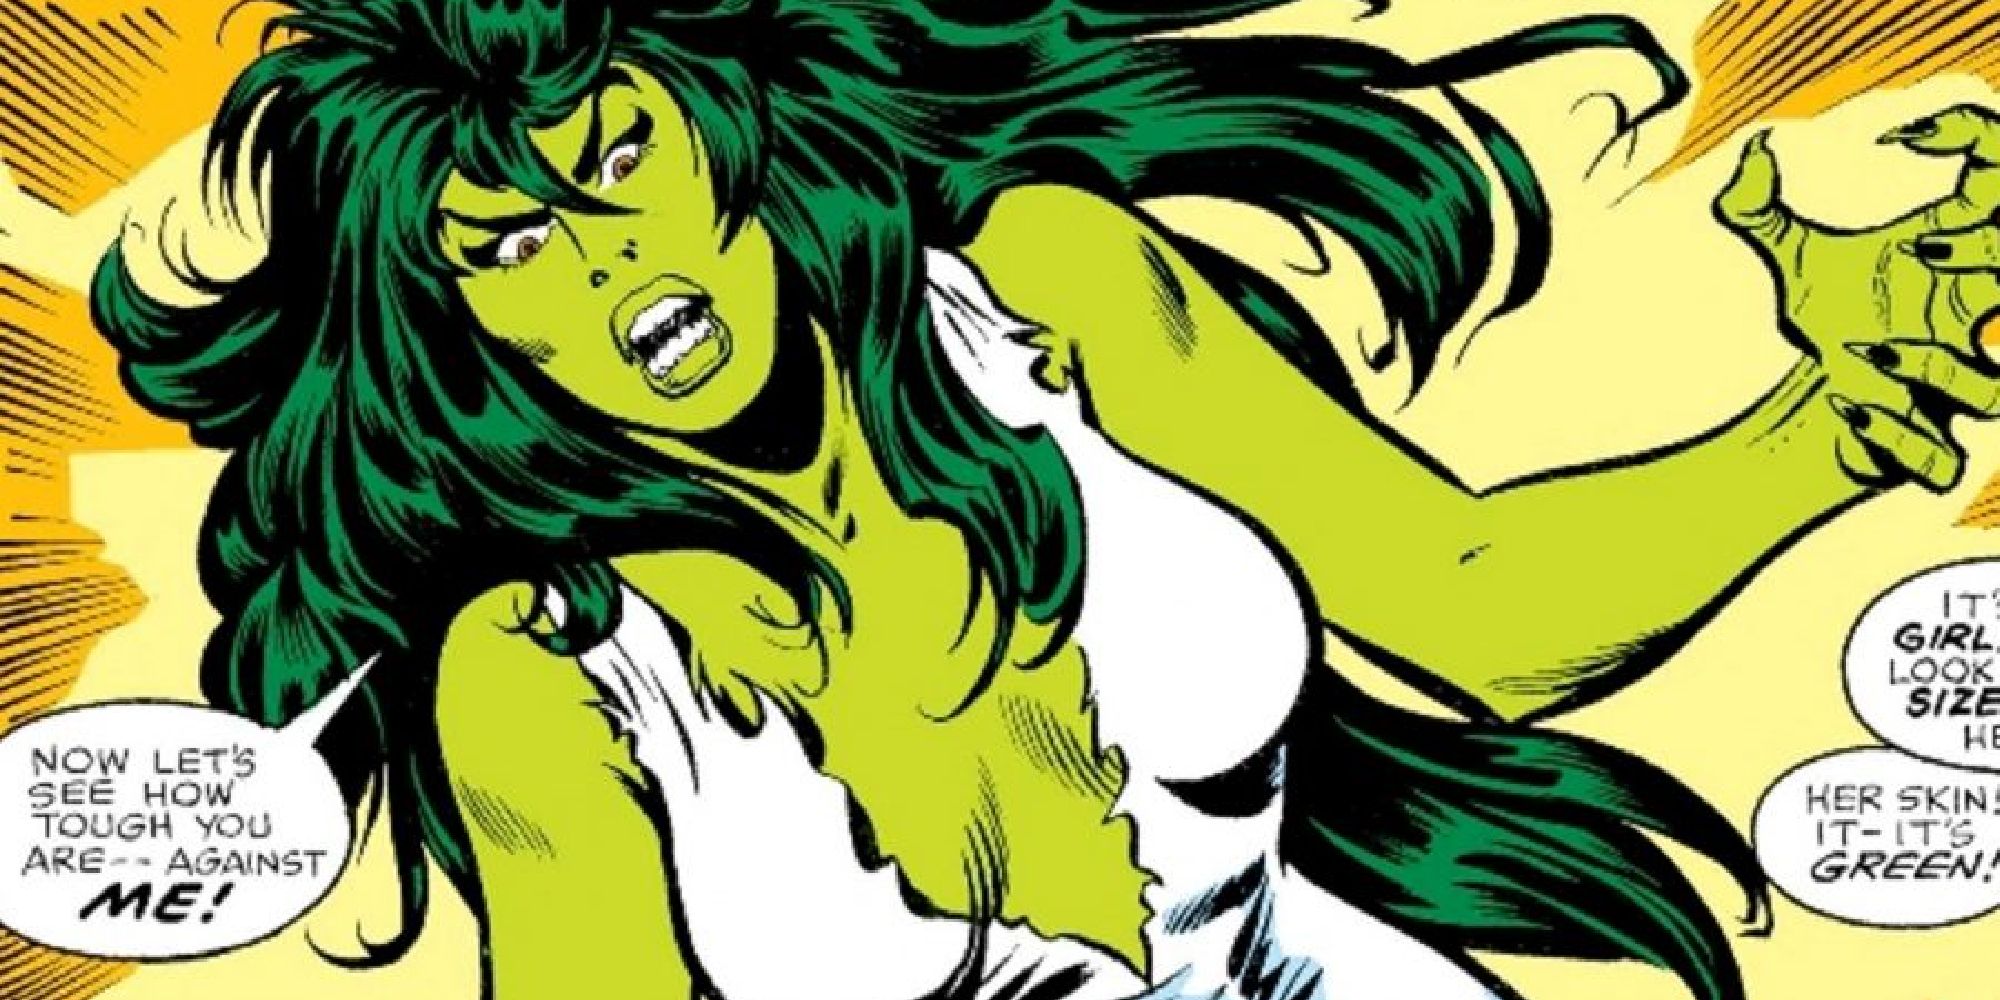 She-Hulk after transforming for the first time in the comics